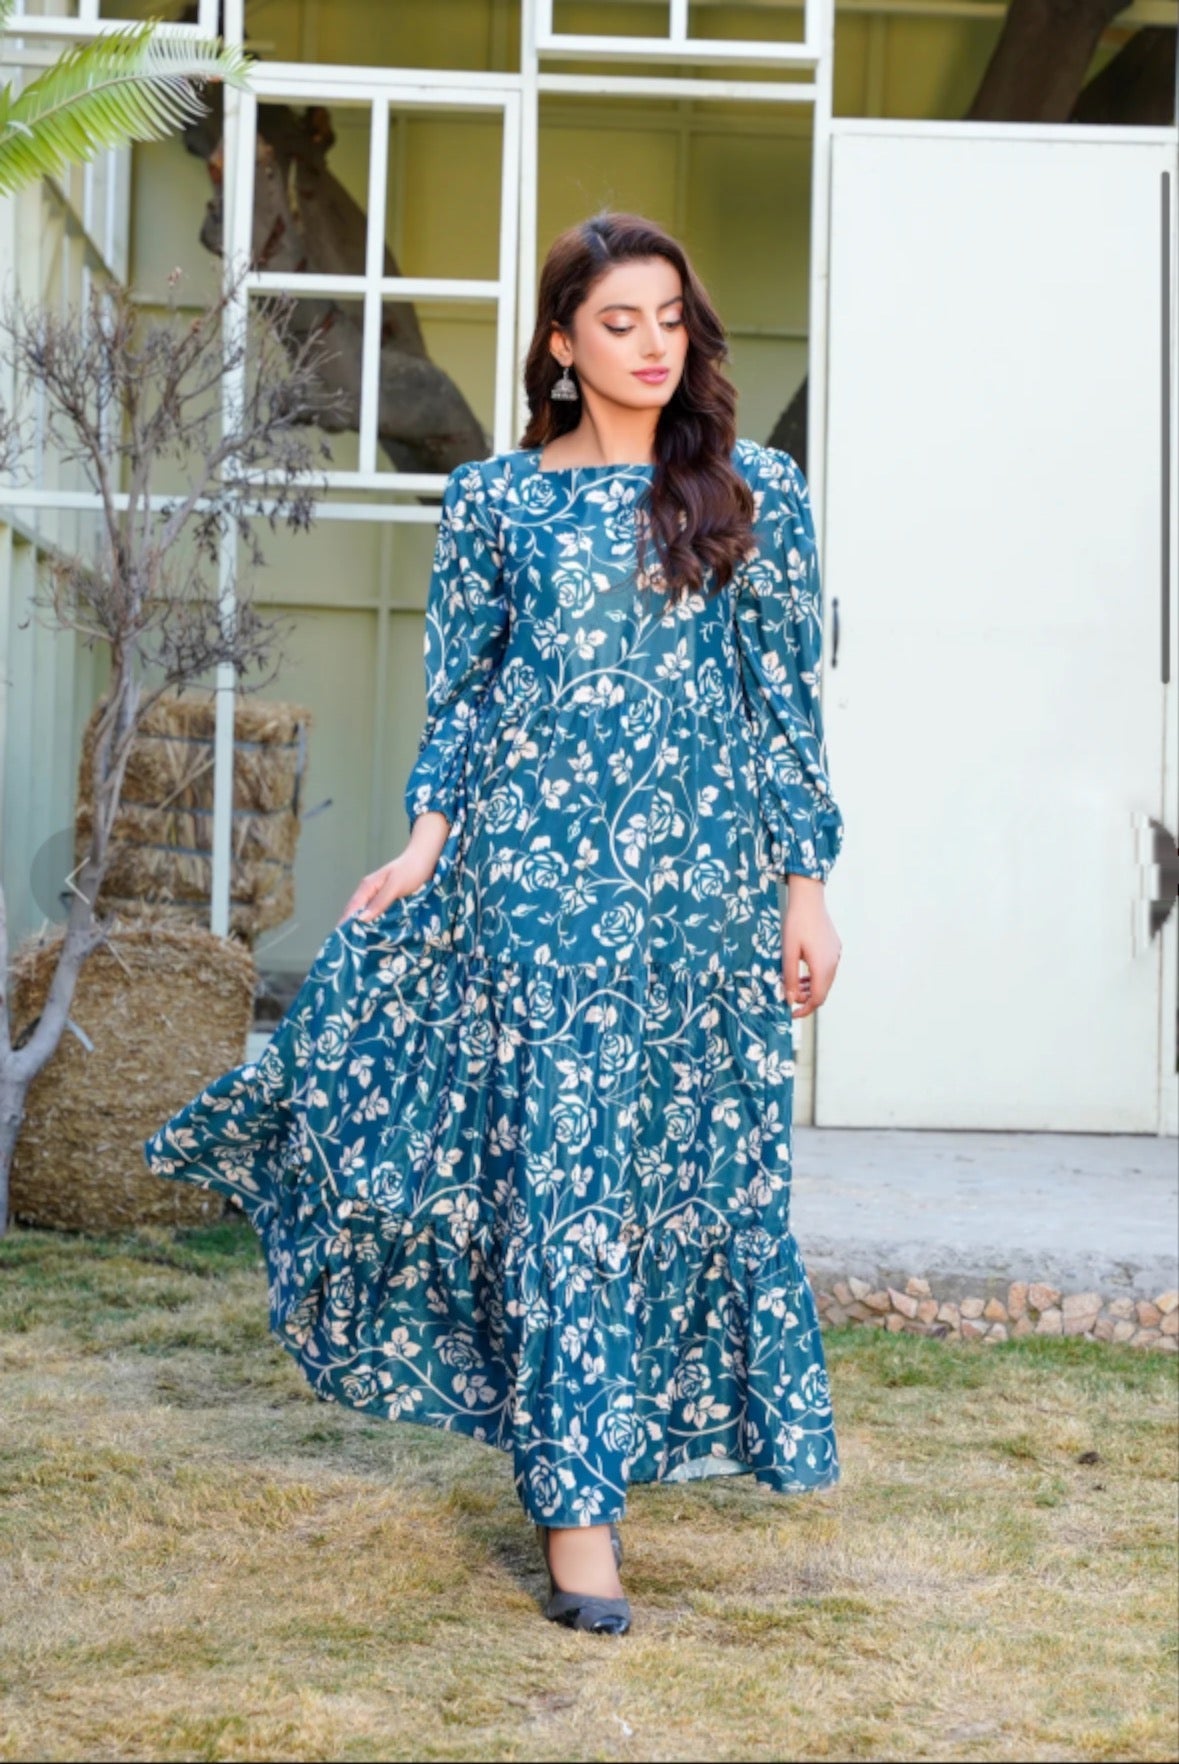 Teal and White Floral Maxi Dress - Peace Lily